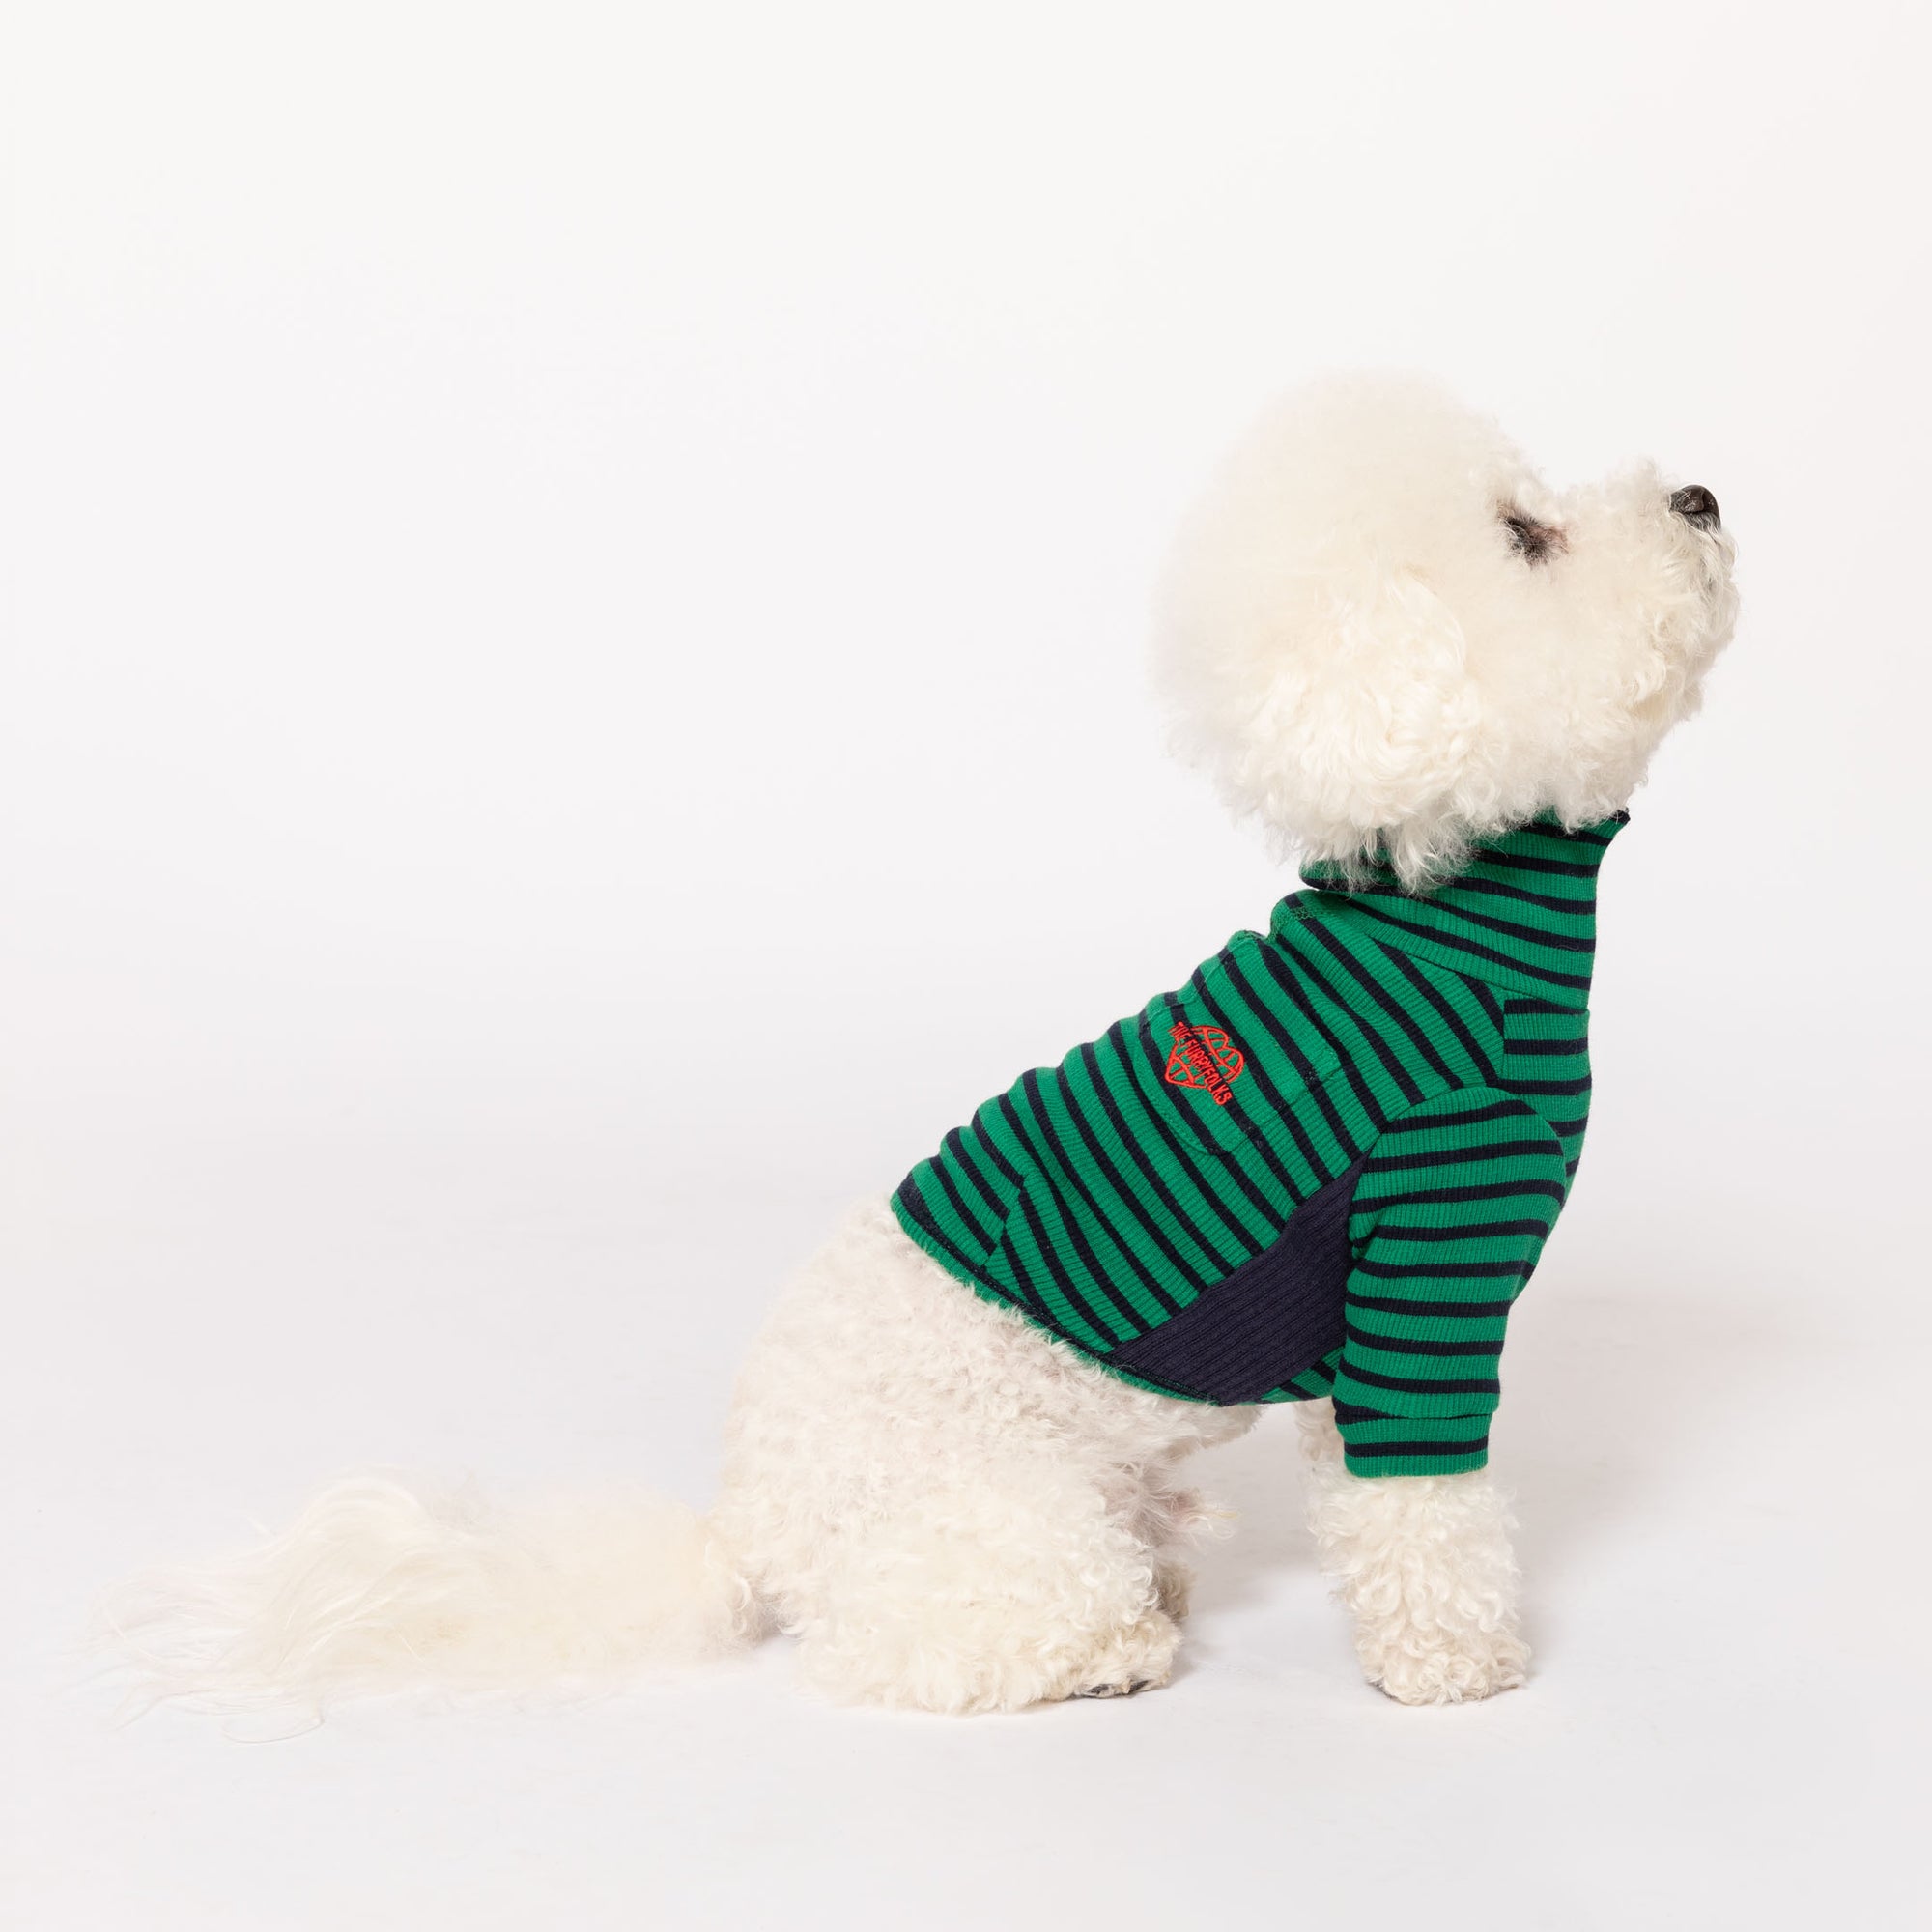 Proud Bichon Frise in a green and navy striped shirt, looking up and ready for fun in this smart pet attire.